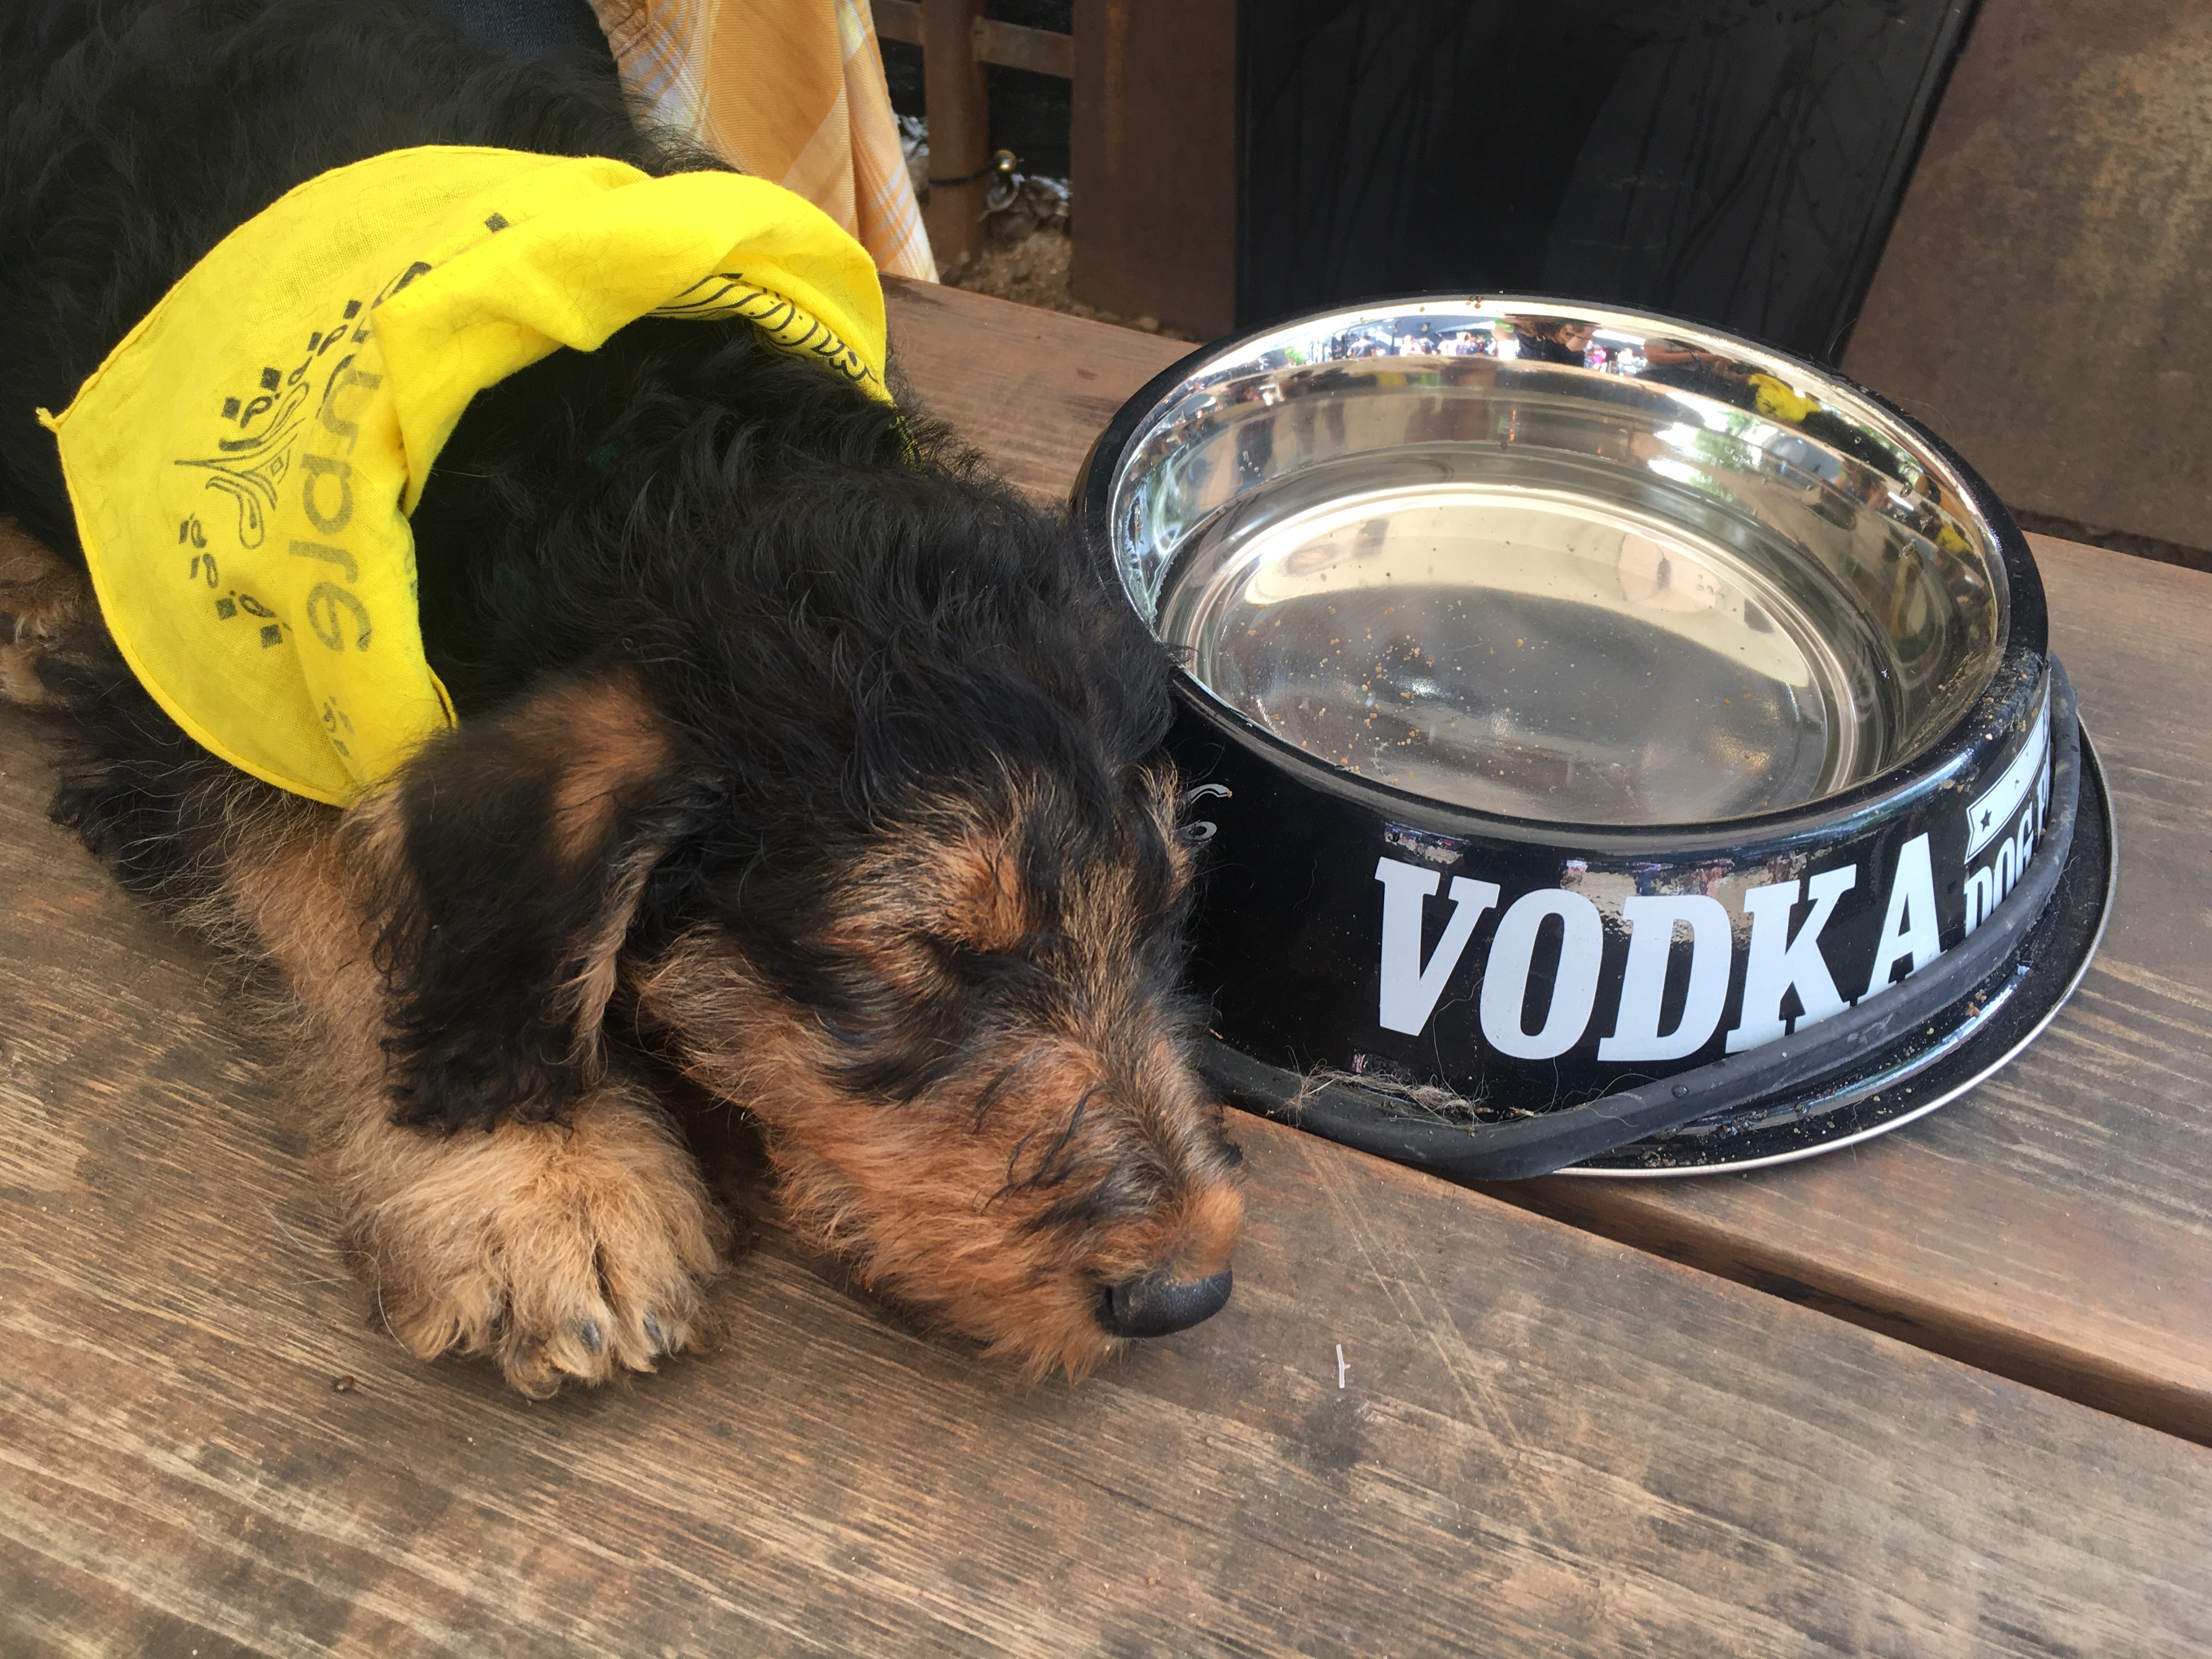 Here Are the Best Puppies of SXSW